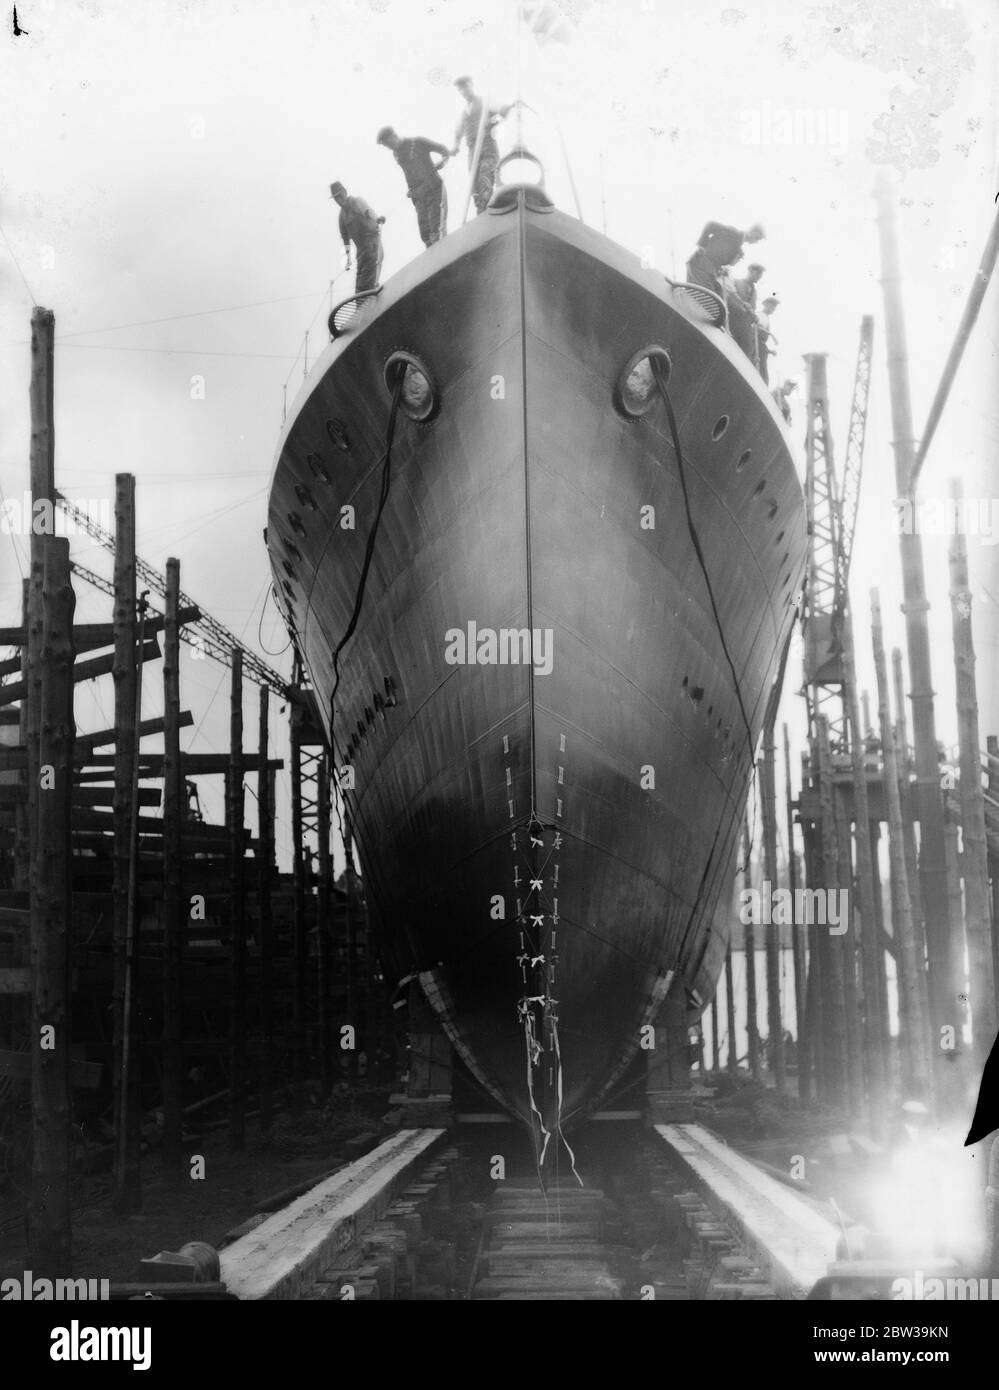 New HMS Grafton (H89) a G-class destroyer launched by Lady Barrie at Messrs Thorneycroft's yards at Woolston near Southampton . Photo shows her sliding down slipway at the launch . 22 July 1935 Stock Photo